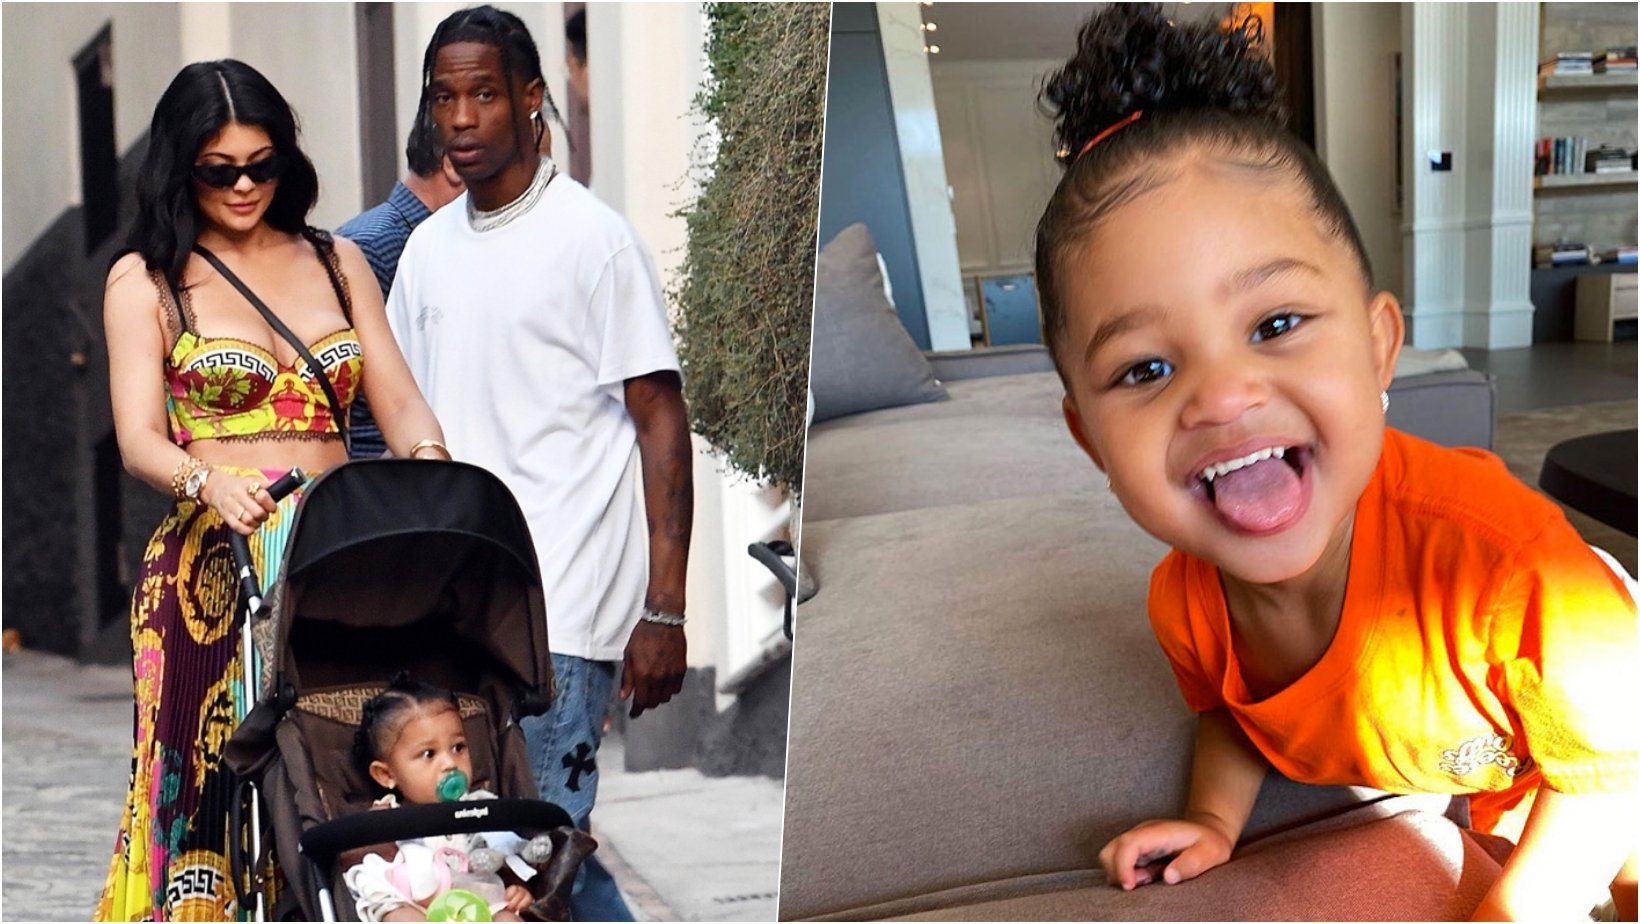 6 facebook cover 33.jpg?resize=1200,630 - Kylie Jenner And Travis Scott Was Heavily Criticized After Shutting Down A Carousel So They Could Ride It Privately